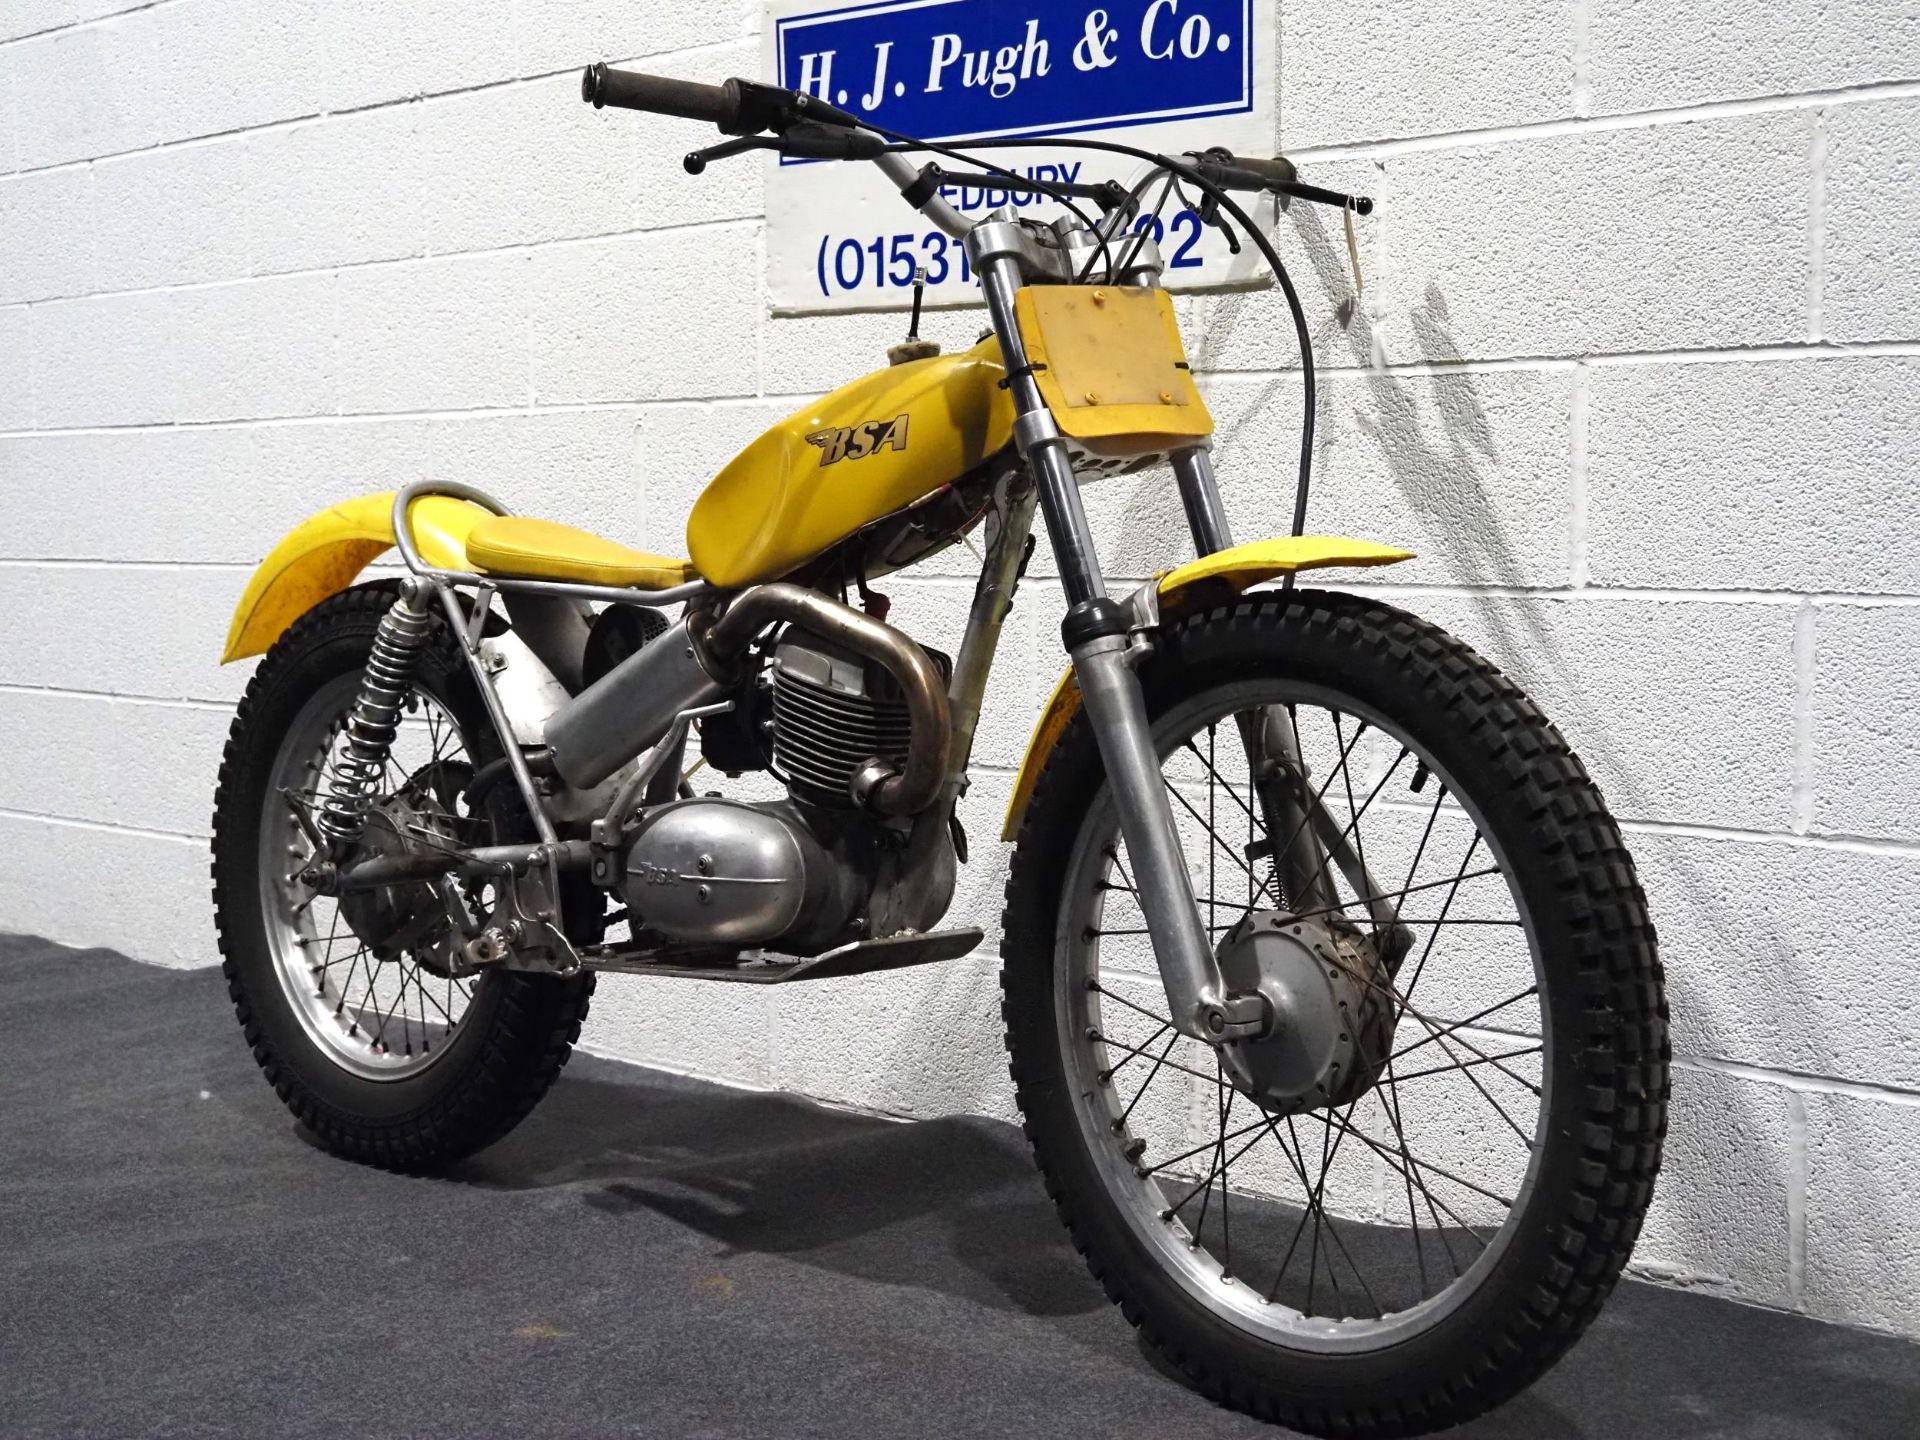 BSA Bantam trials motorcycle. 175cc Engine no. CEO7780B175 Property of a deceased estate. This - Image 2 of 5